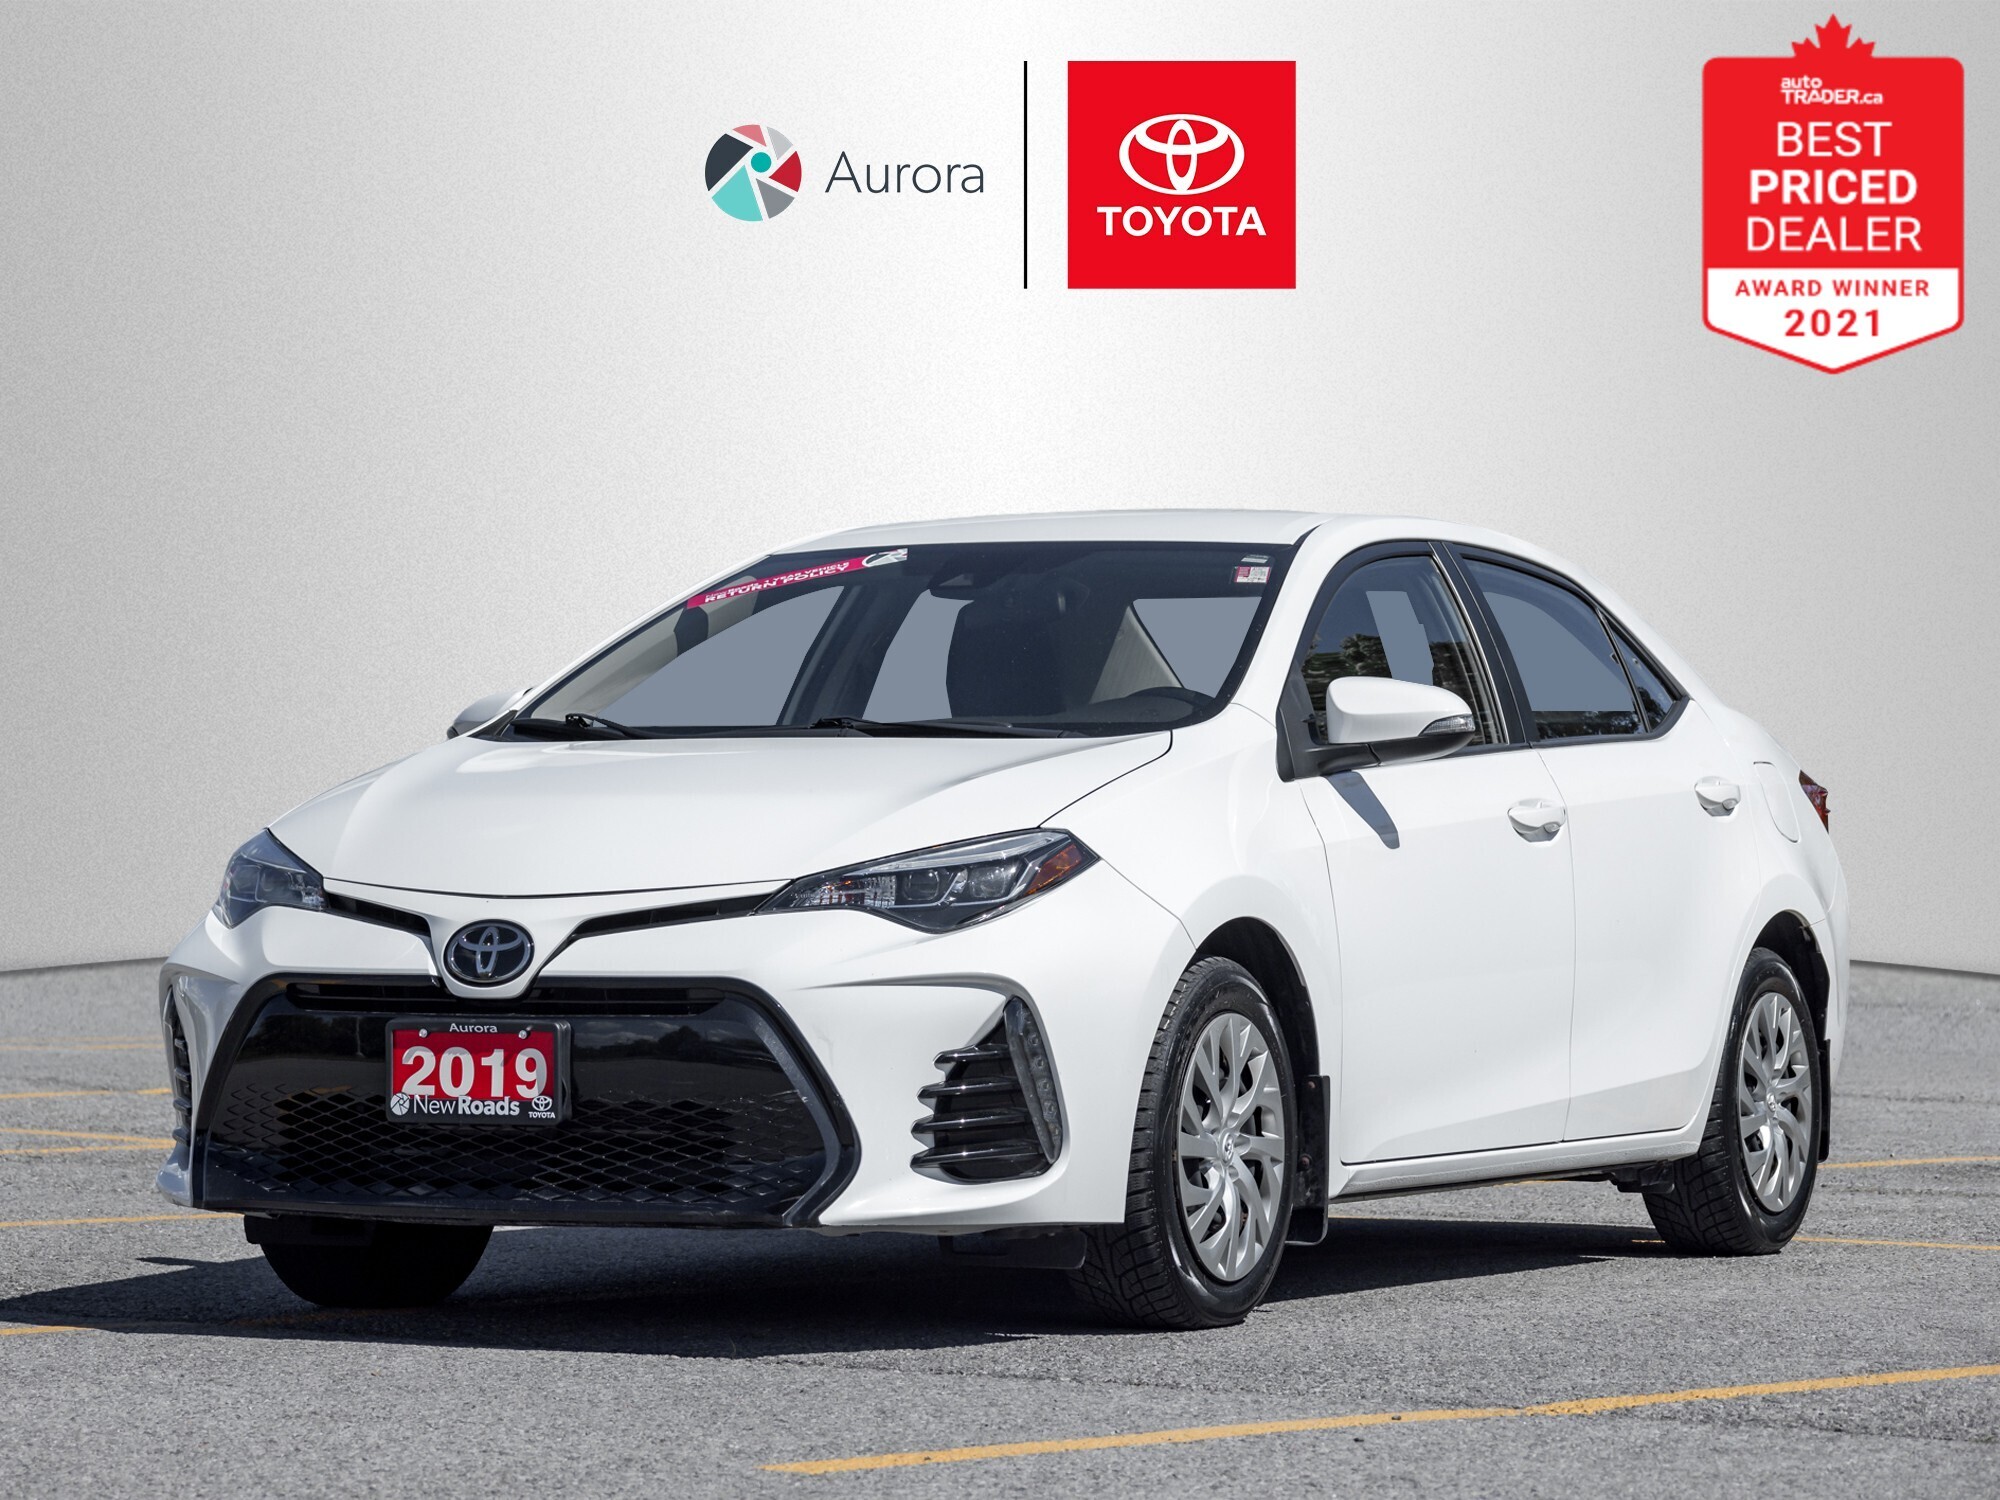 2019 Toyota Corolla SE, 58745kms Below Avg, Accident free, Well Kept